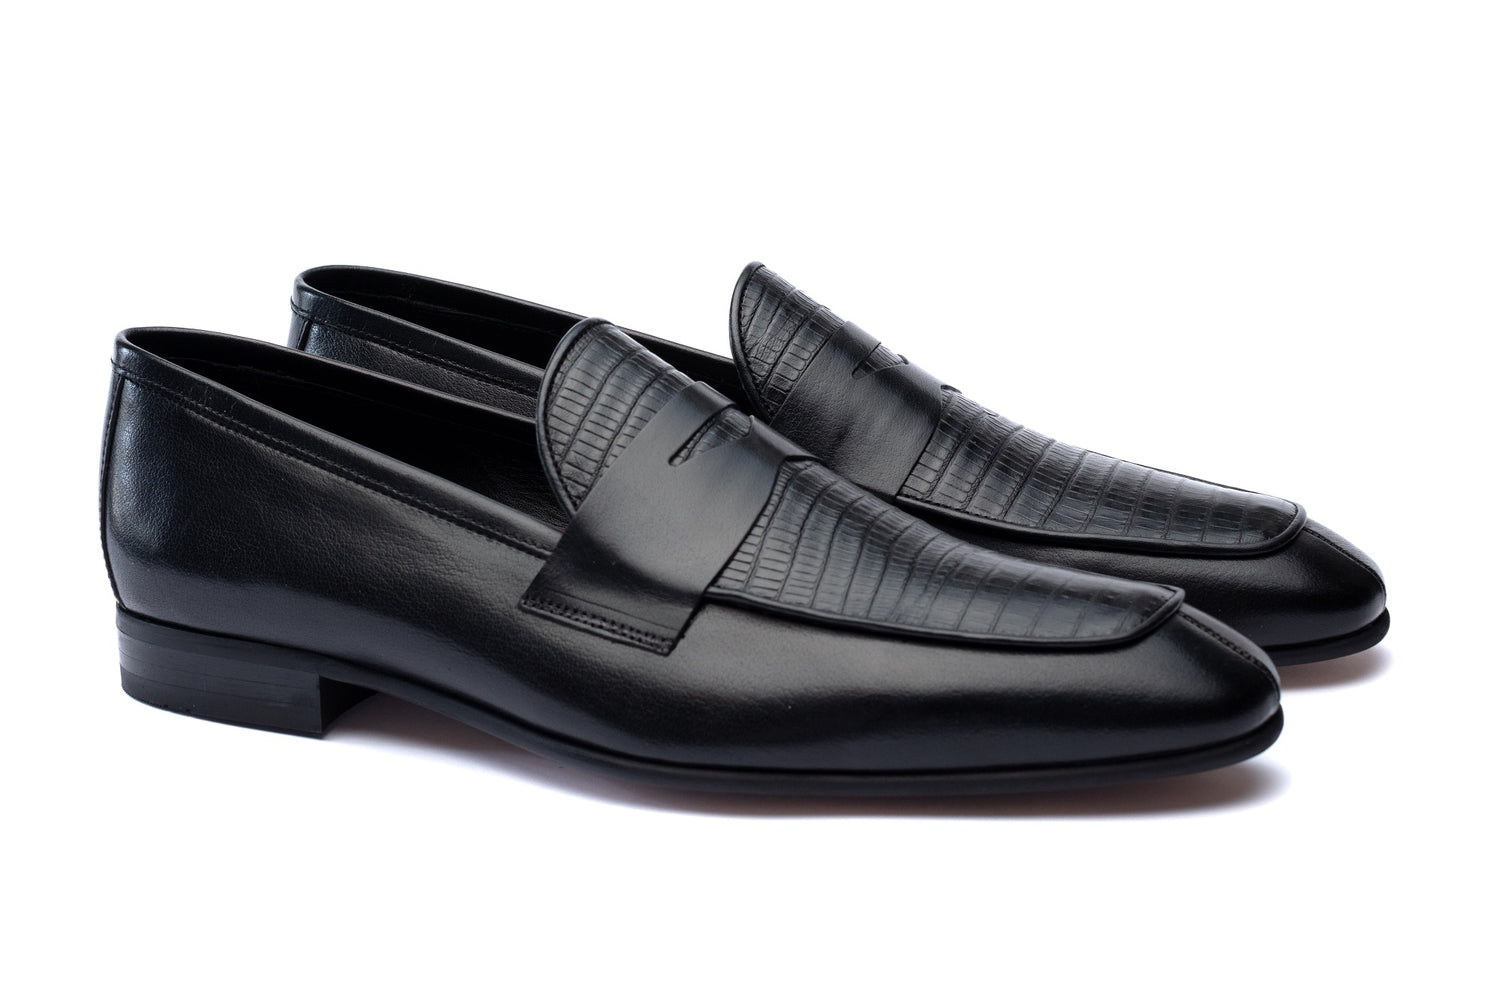 The Nuno Loafers - Loafers by Urbbana